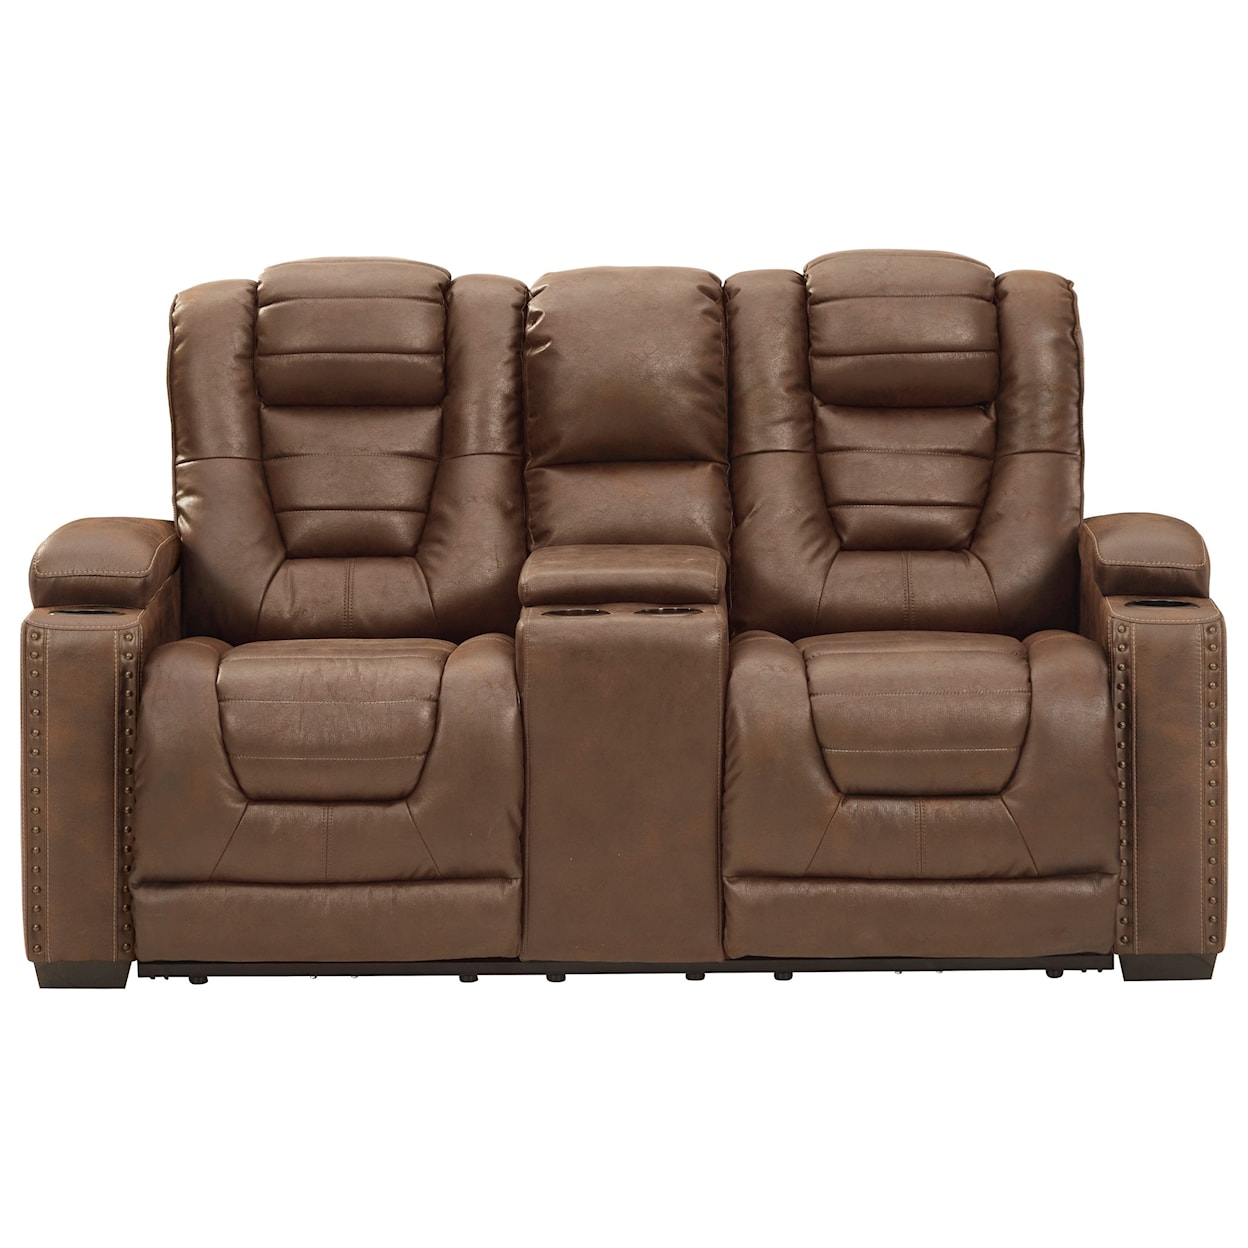 Michael Alan Select Owner's Box Power Rec Loveseat w/ Console & Adj Hdrsts